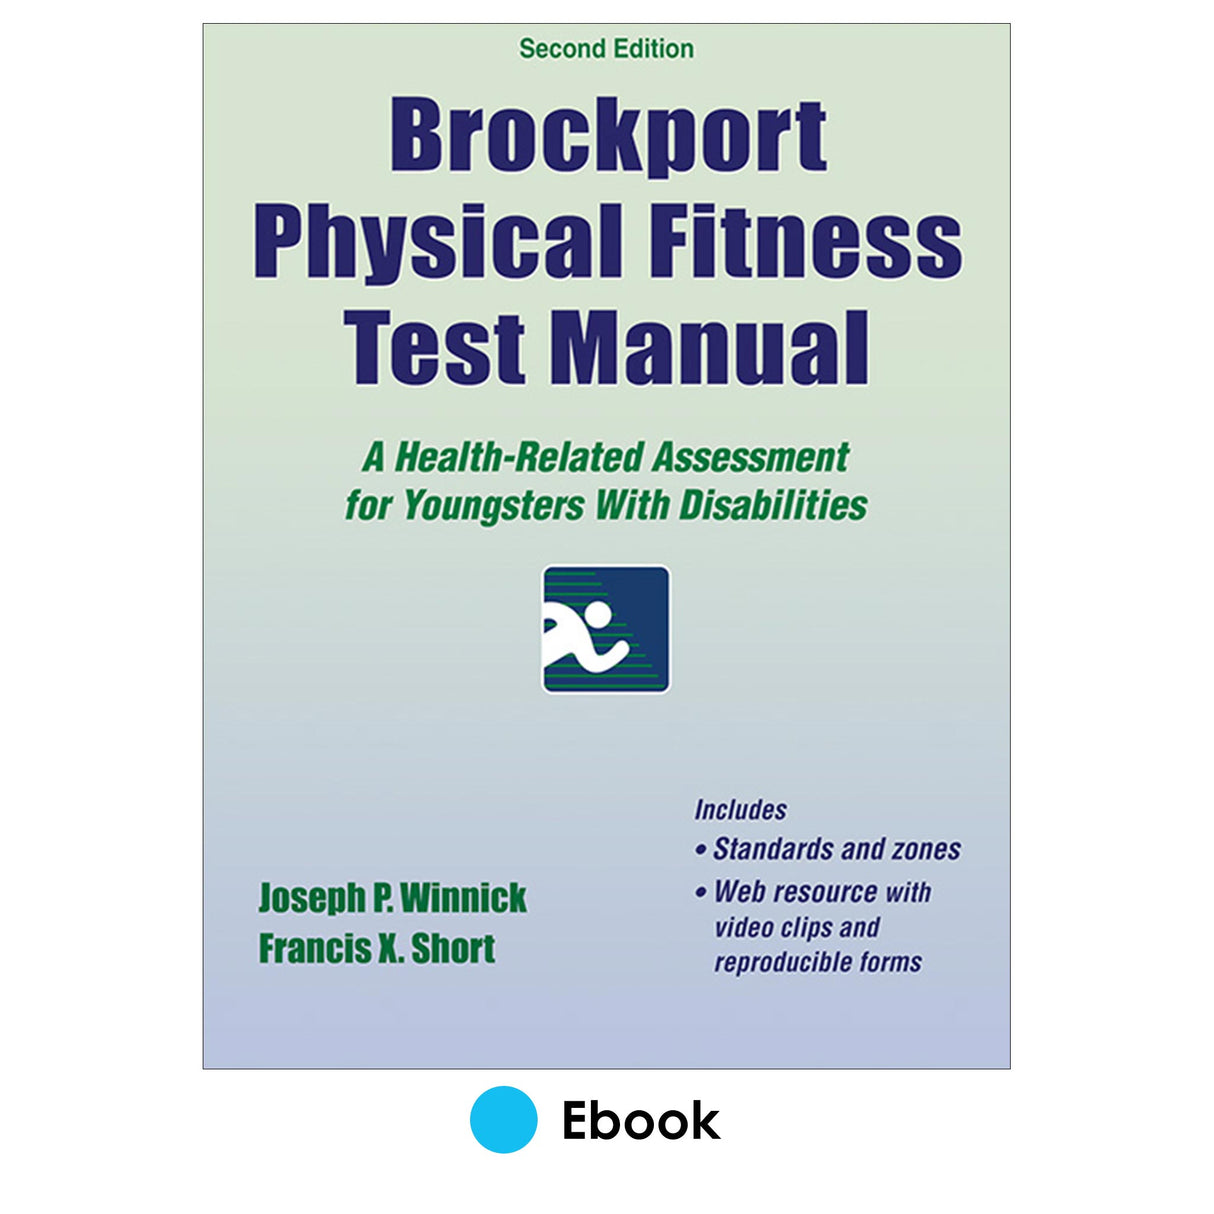 Brockport Physical Fitness Test Manual 2nd Edition PDF With Web Resource